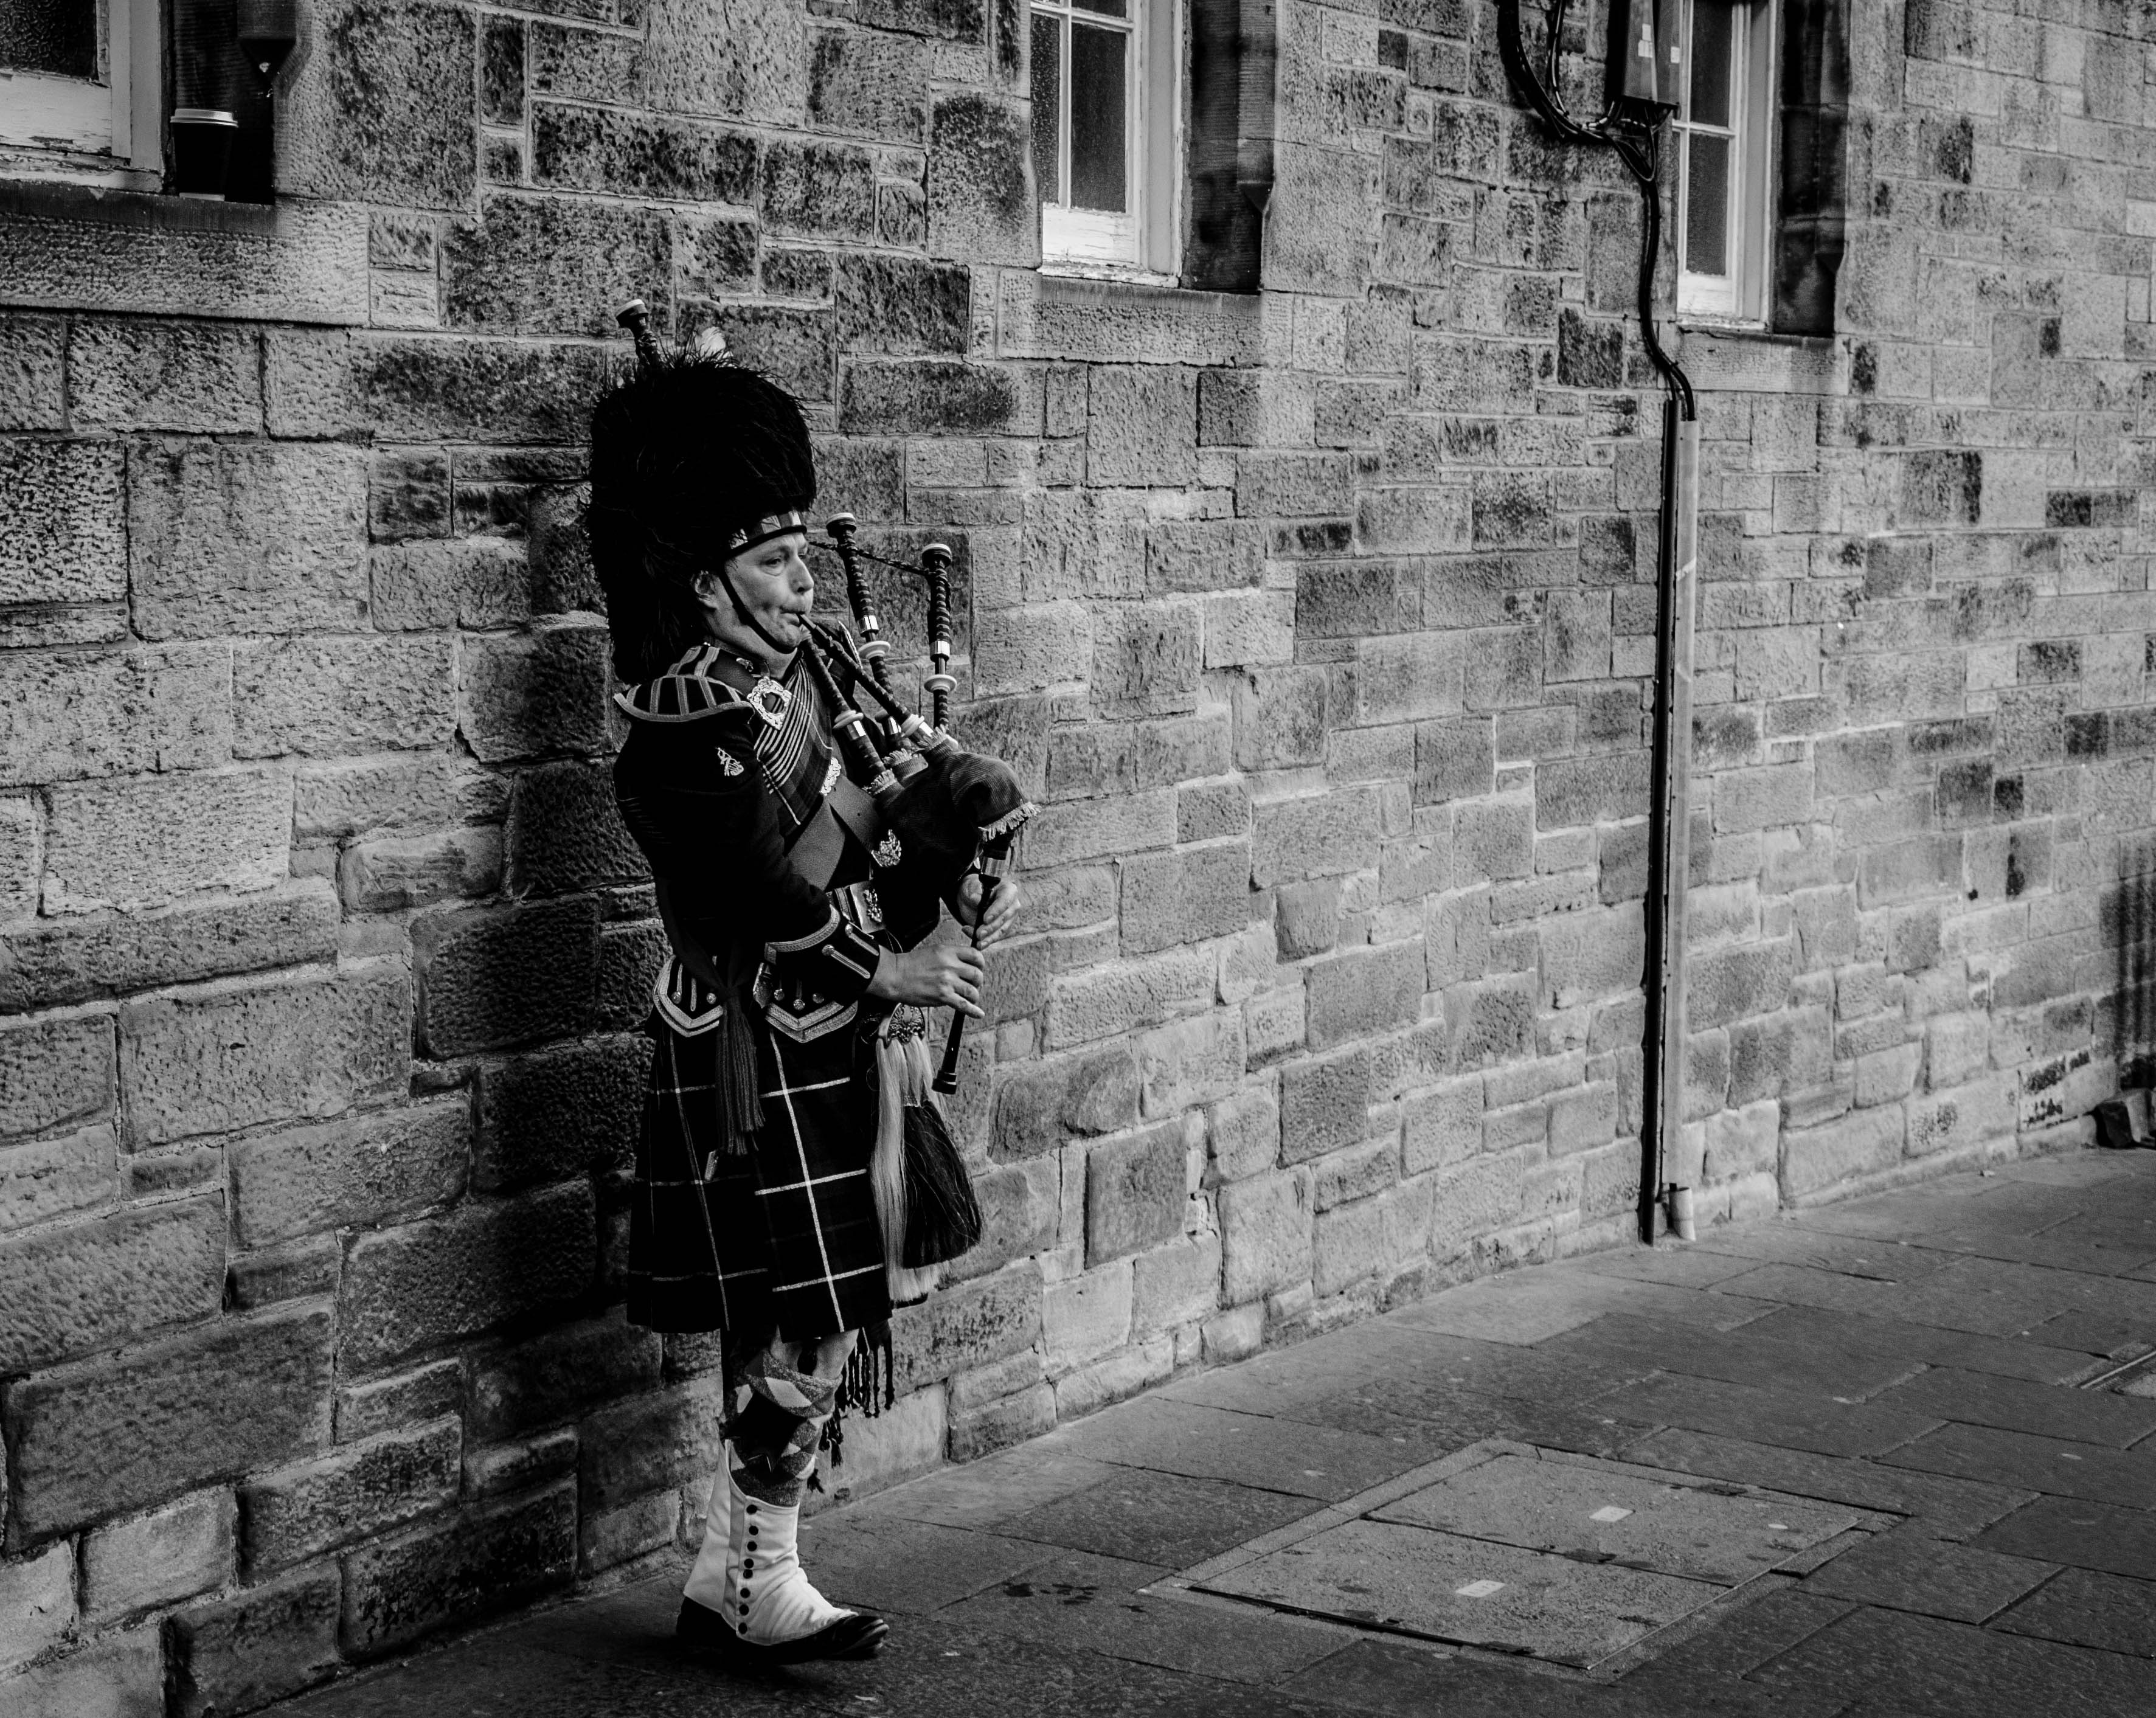 Person using bagpipes near wall in grayscale photography